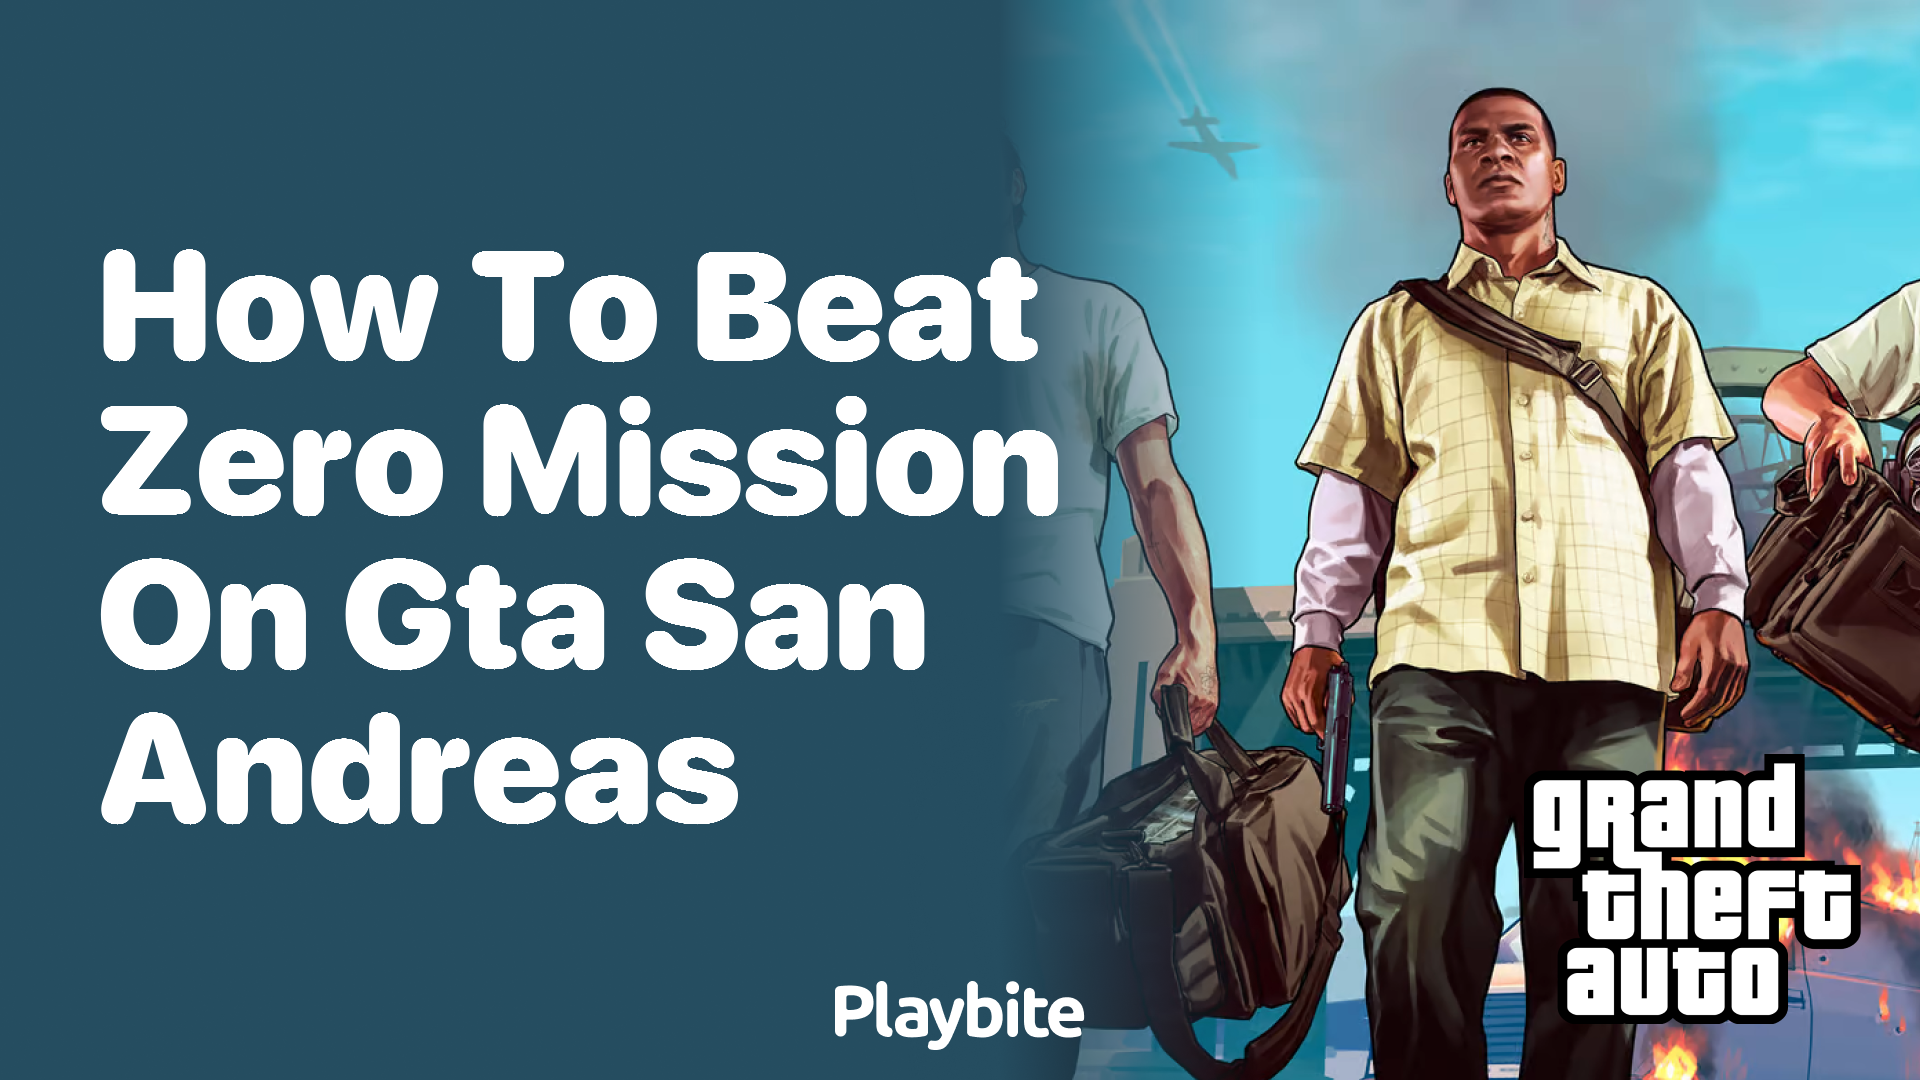 How to beat Zero Mission on GTA San Andreas